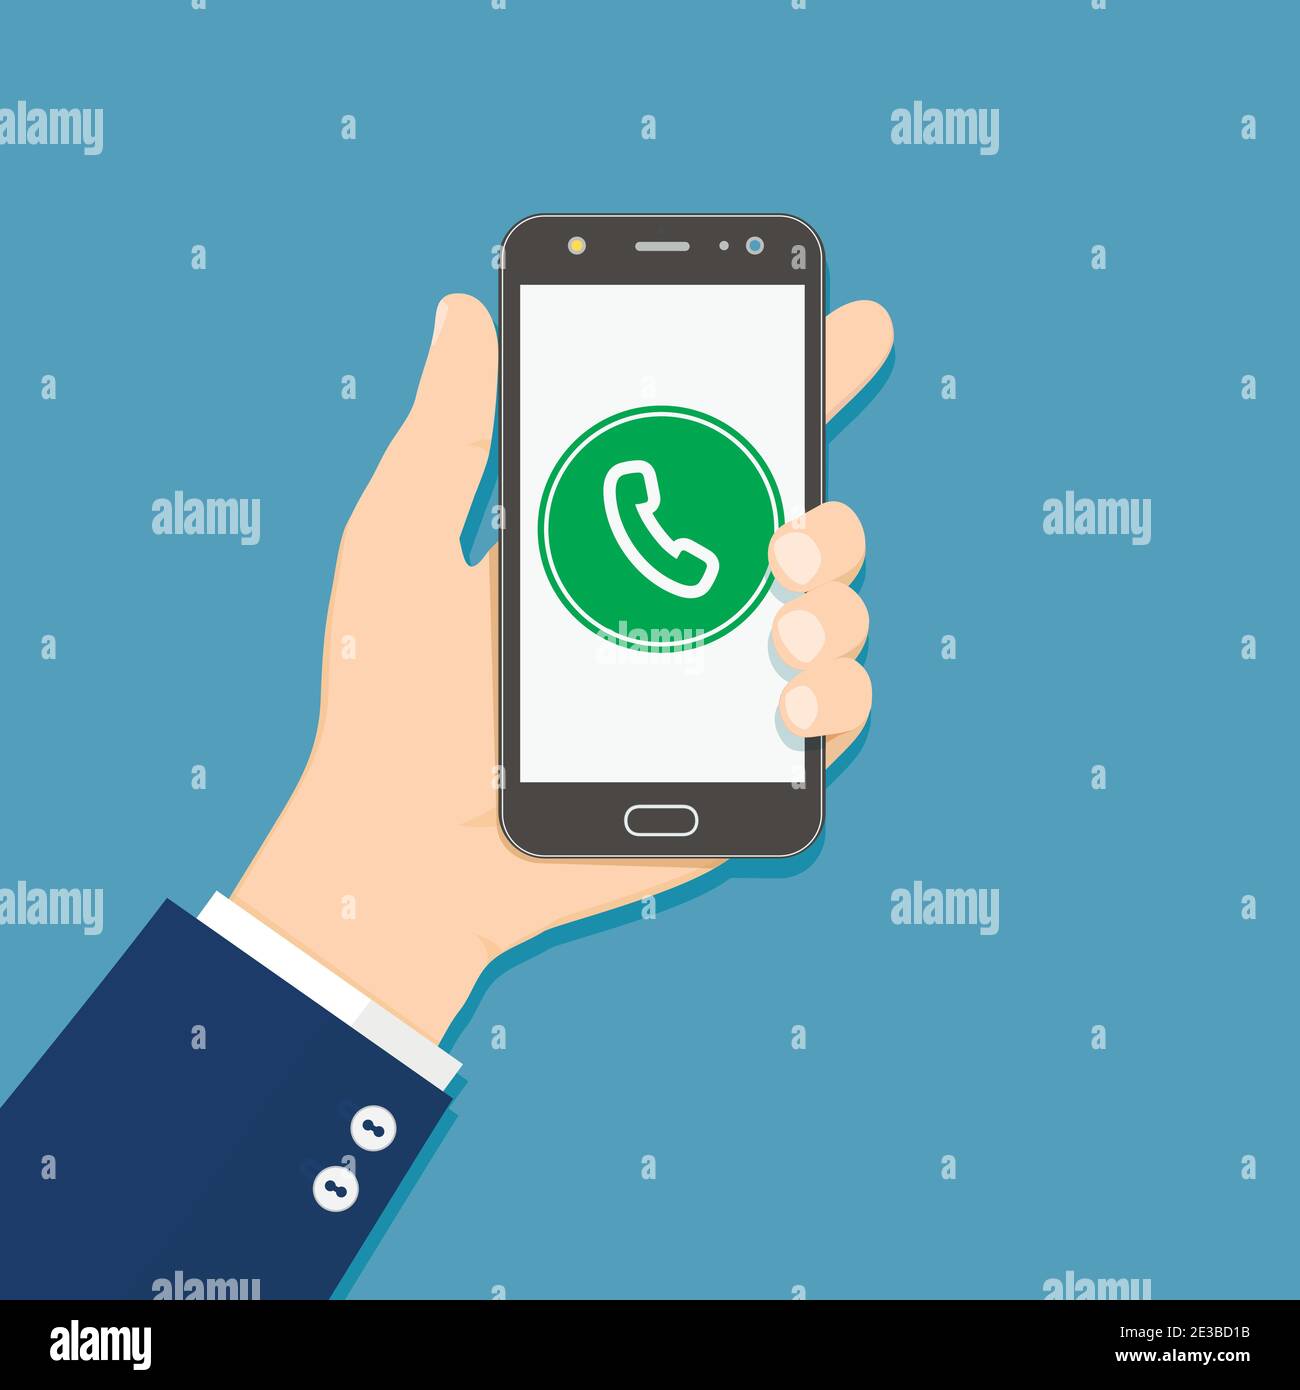 Phone call button on smartphone screen. Hand holding smartphone. Flat design vector illustration. Stock Vector